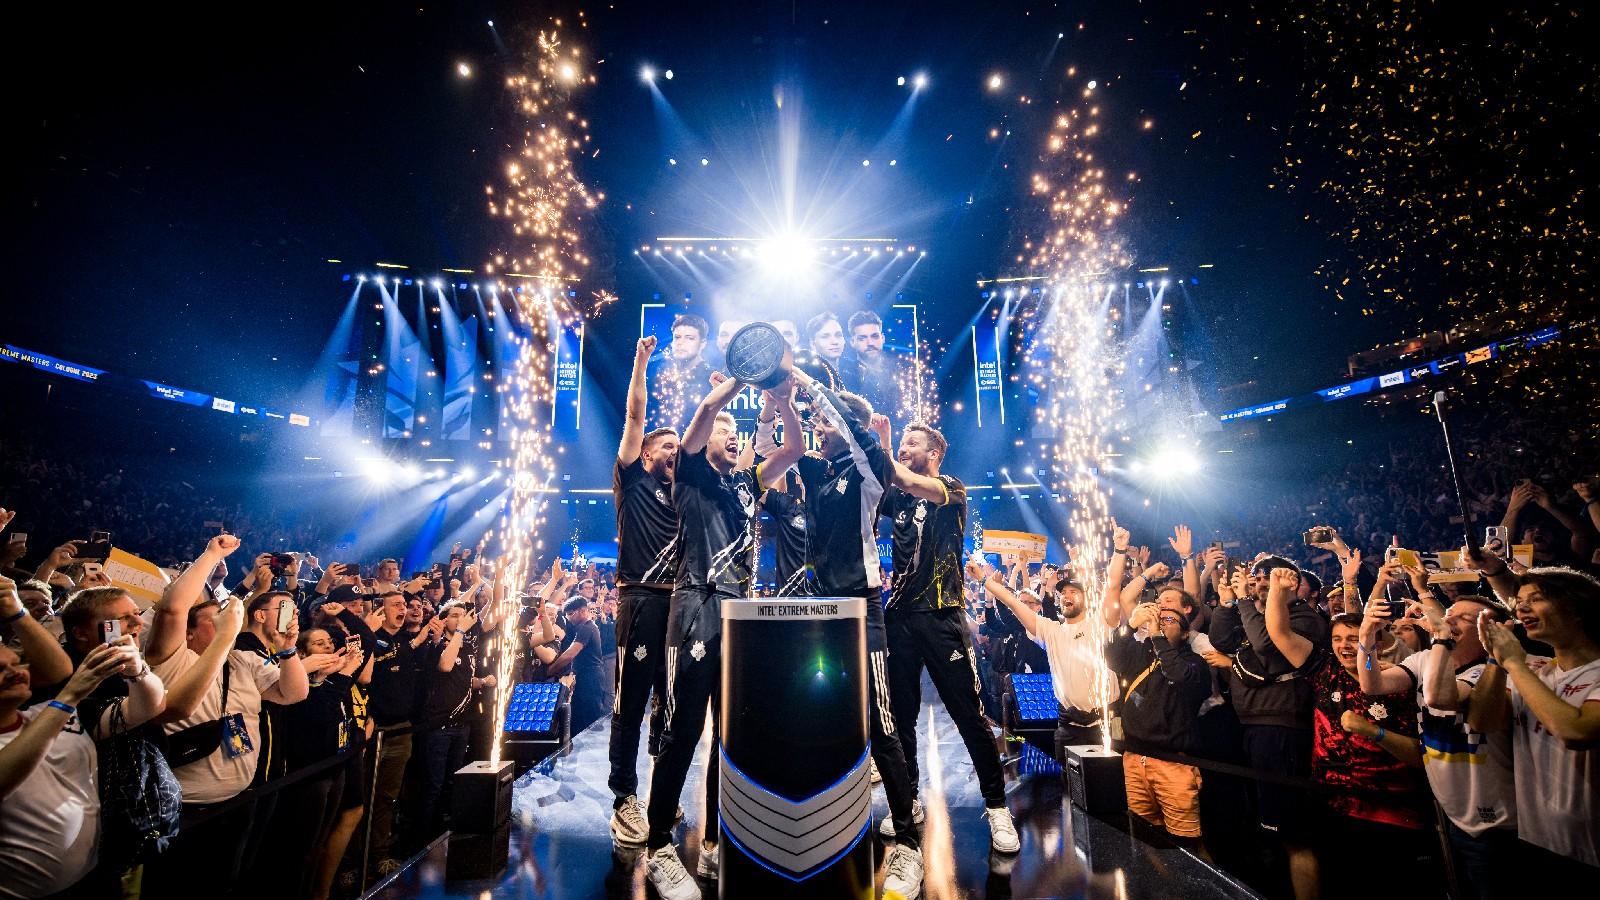 Team Vitality is victorious at Intel® Extreme Masters Rio 2023 and